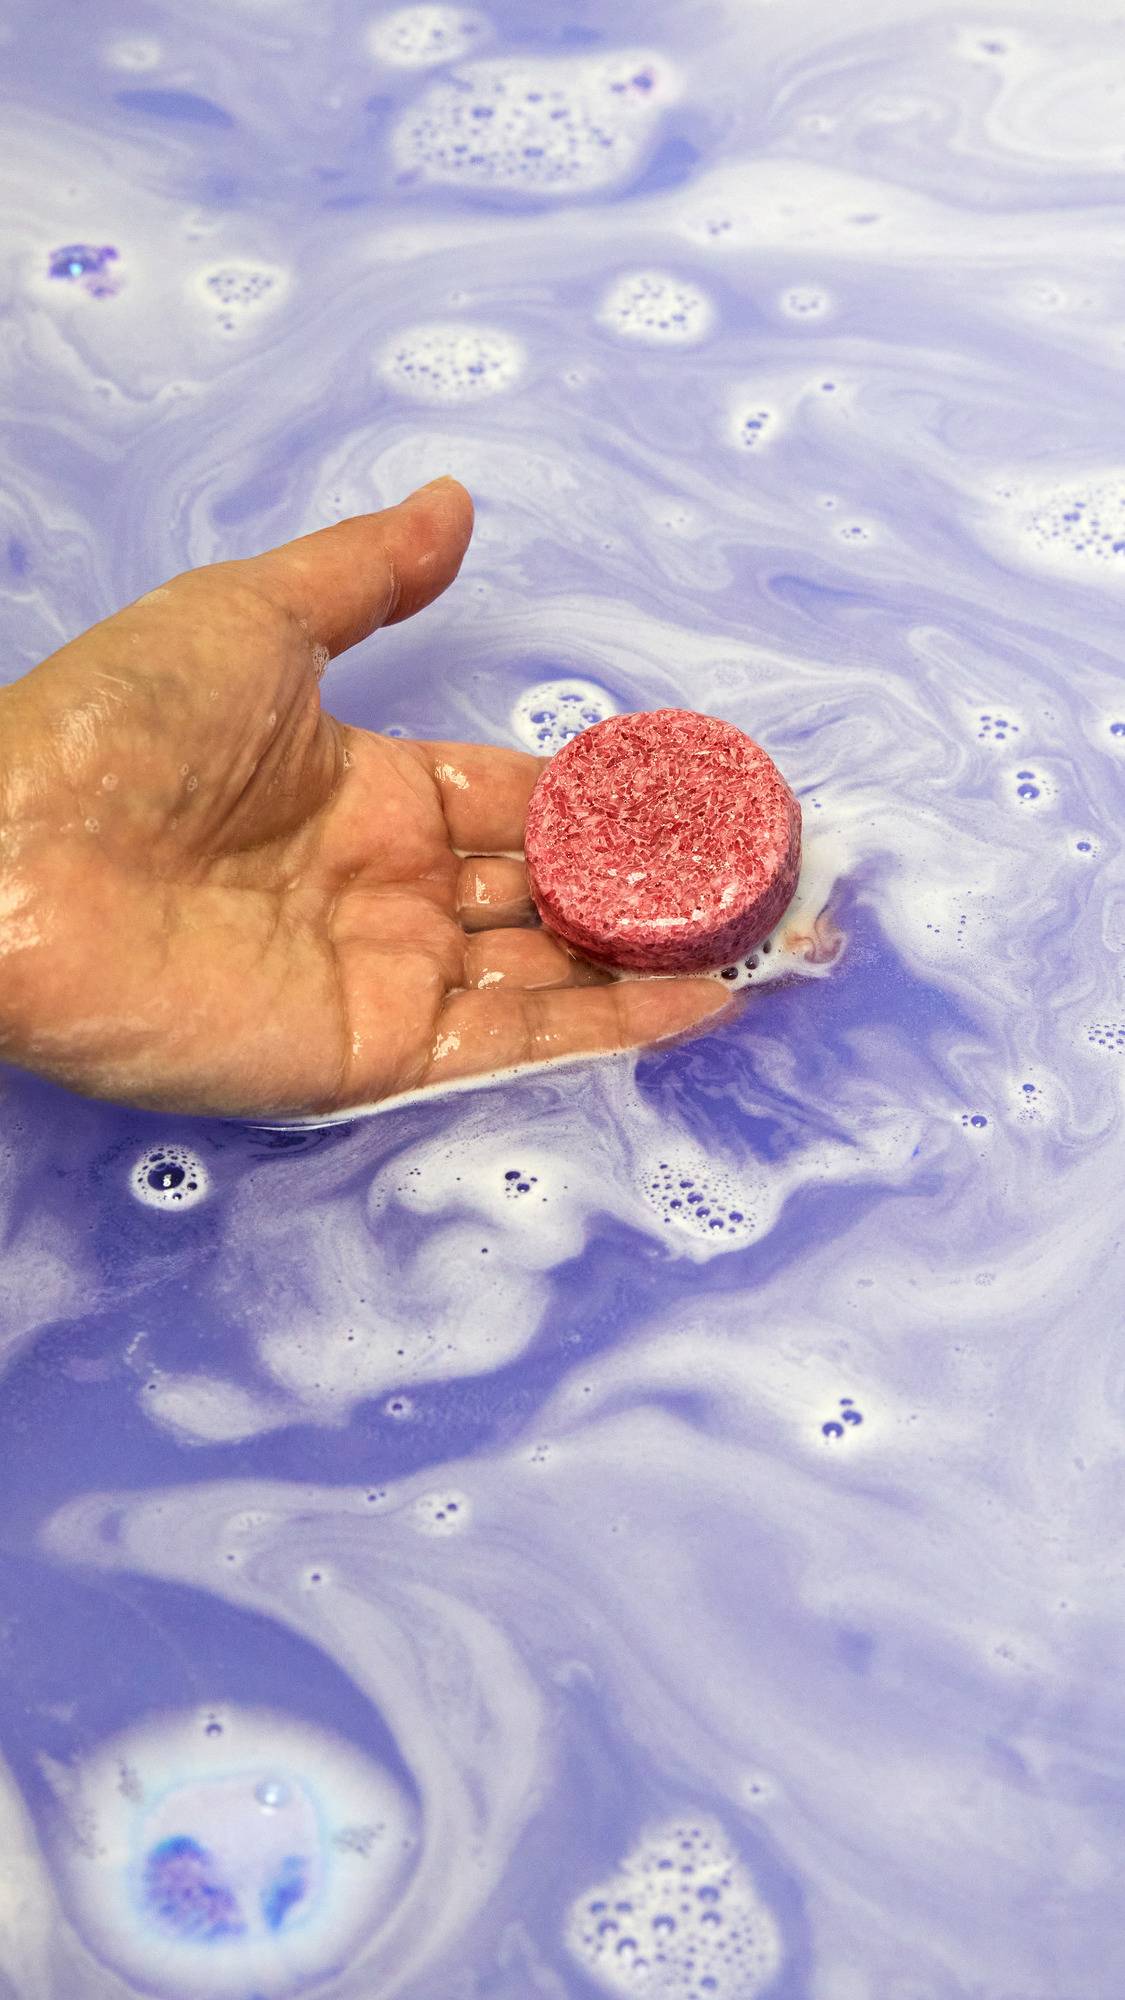 The Sleepy Bot bath bomb has completely dissolved in the water leaving behind a surprise mini reusable shampoo bar held by the model above pastel purple waters. 